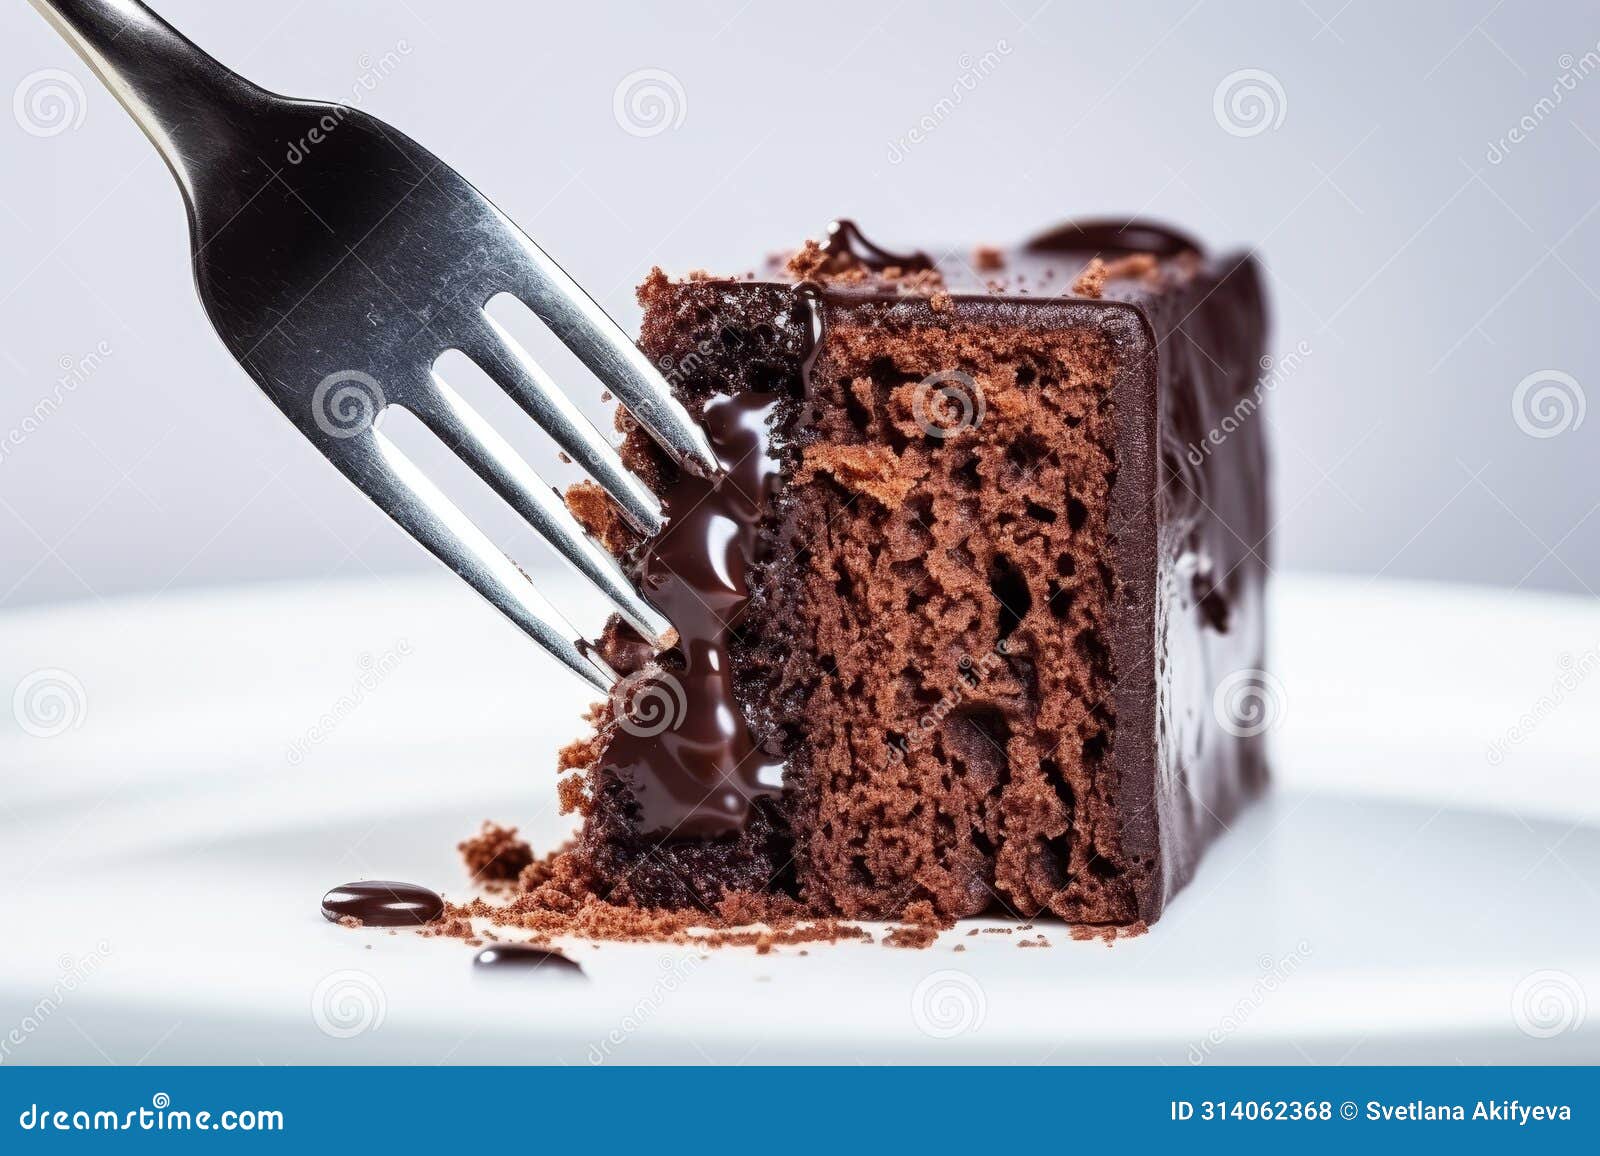 close-up display of fork with piece of cake on light background, depicting human reliance on food